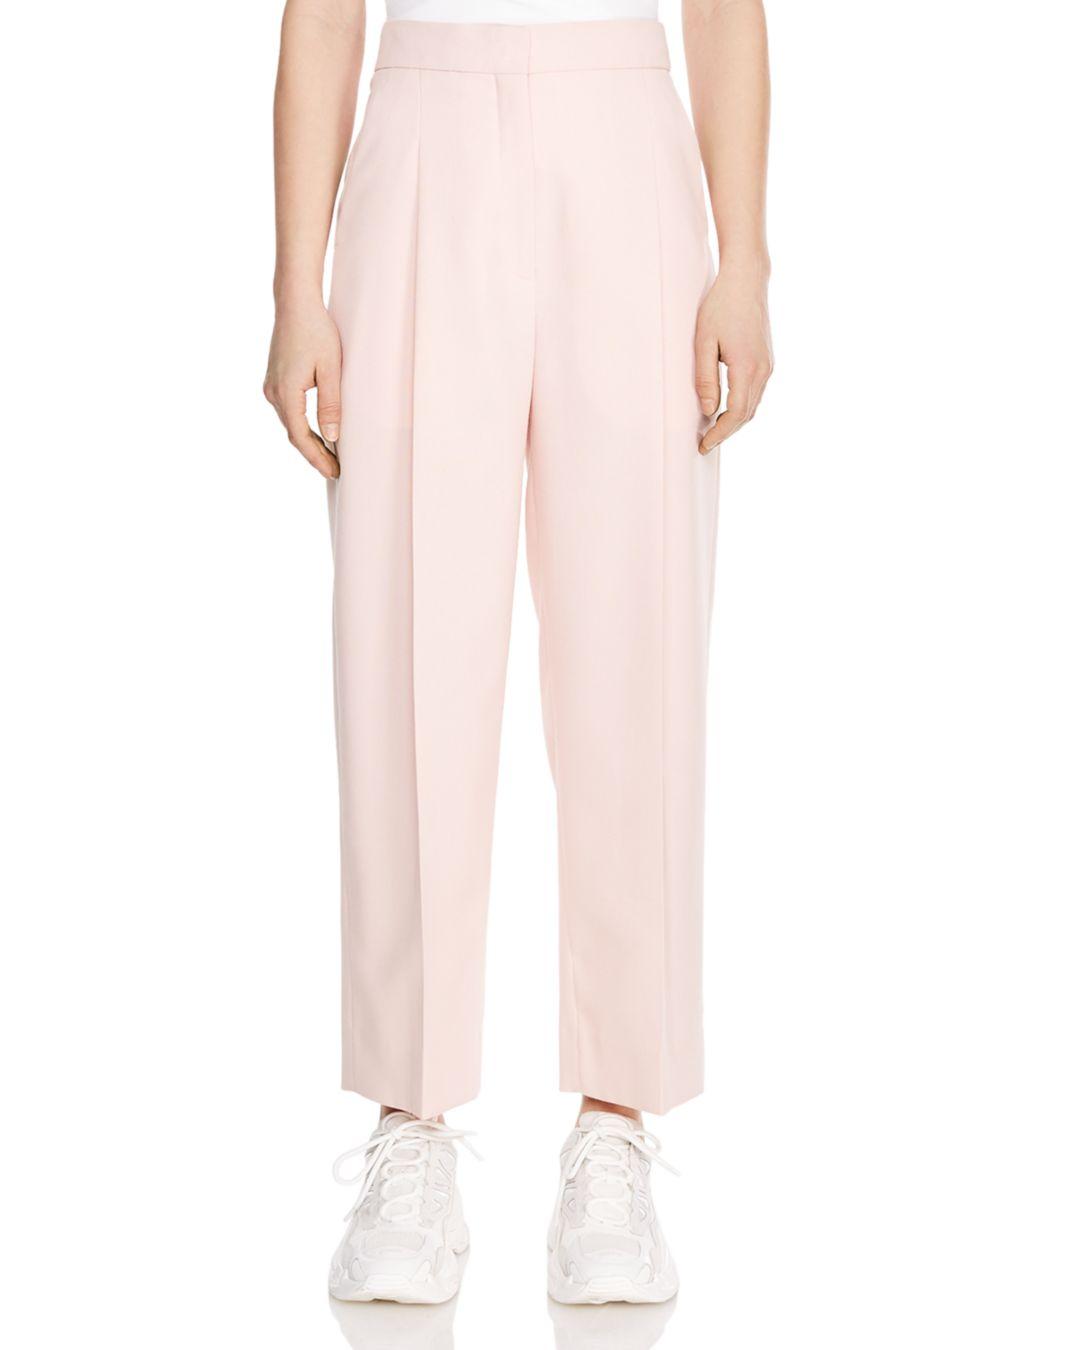 Sandro Aude Cropped Center - Creased Pants in Pink - Lyst